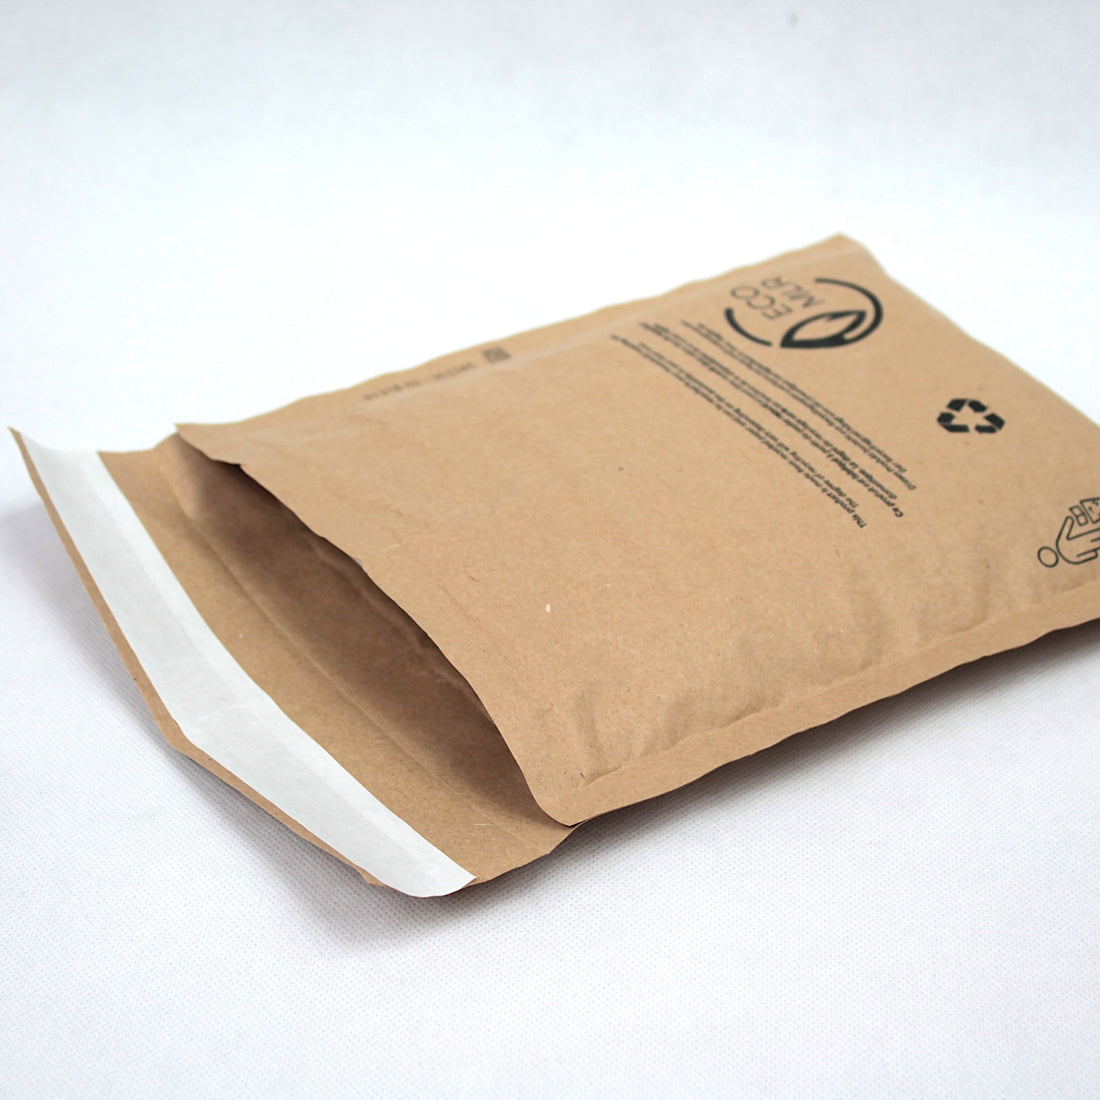 Padded Envelopes, the answer to your packaging problems